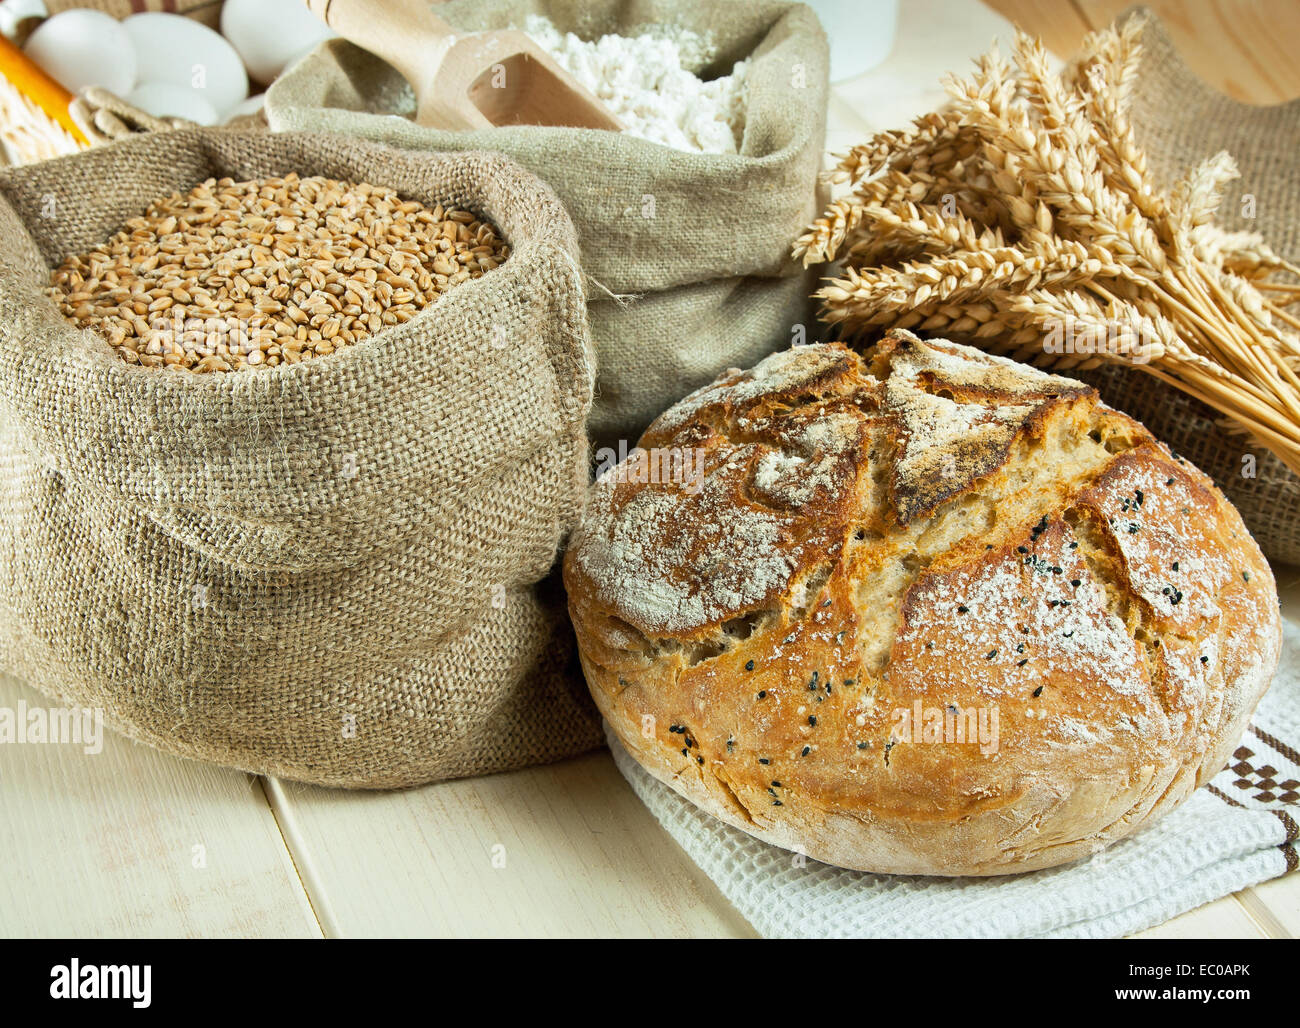 Homemade bread and wheat grain on table Stock Photo